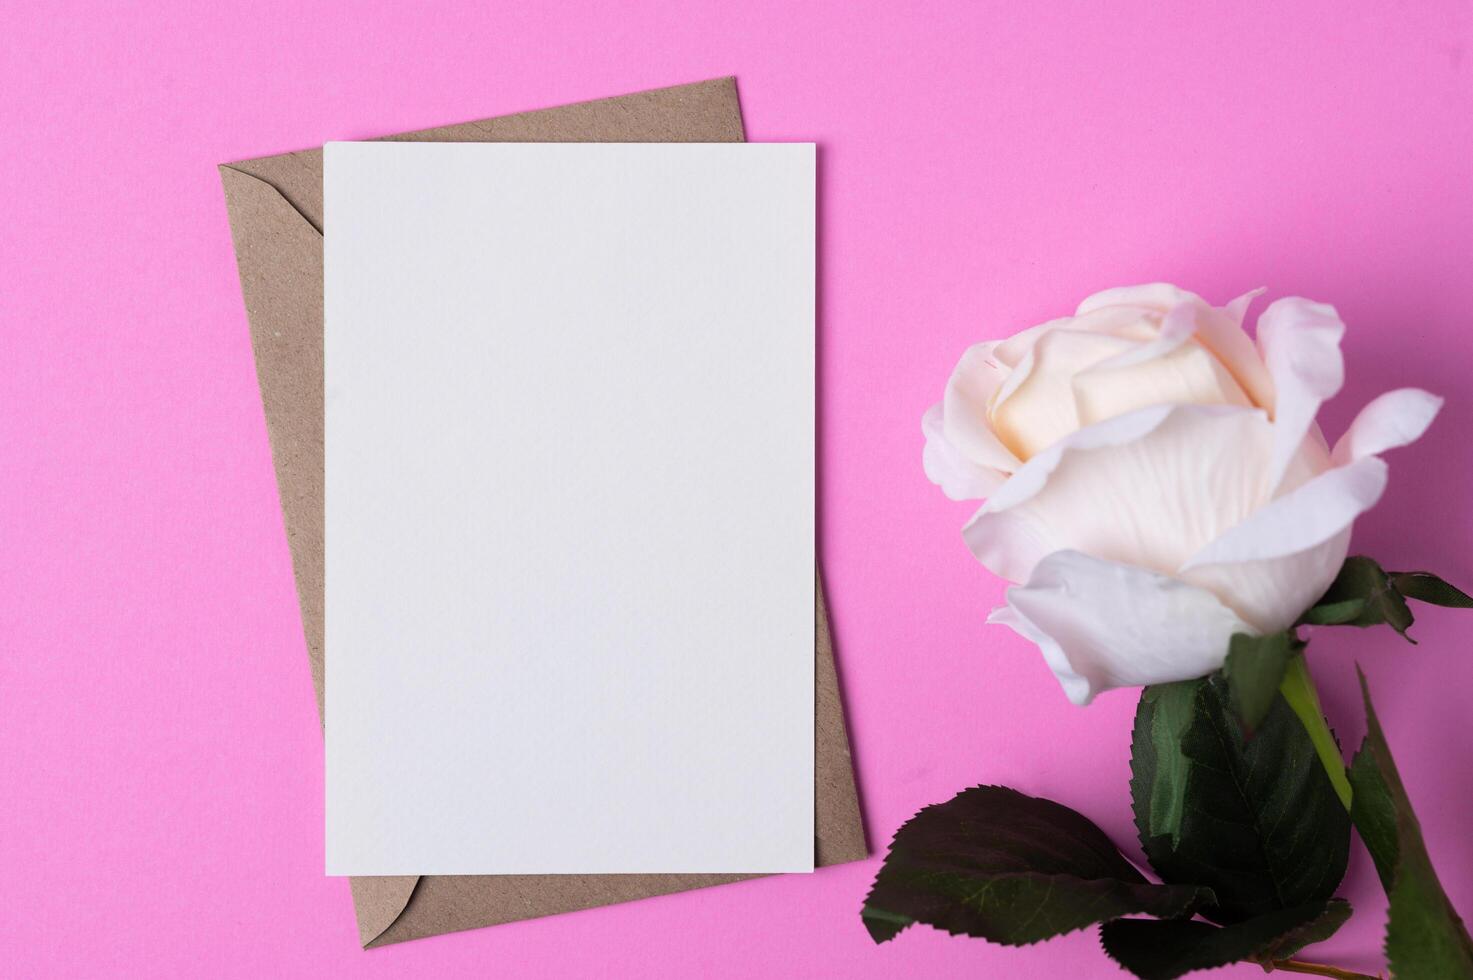 Blank paper with flowers placed on a pink background photo